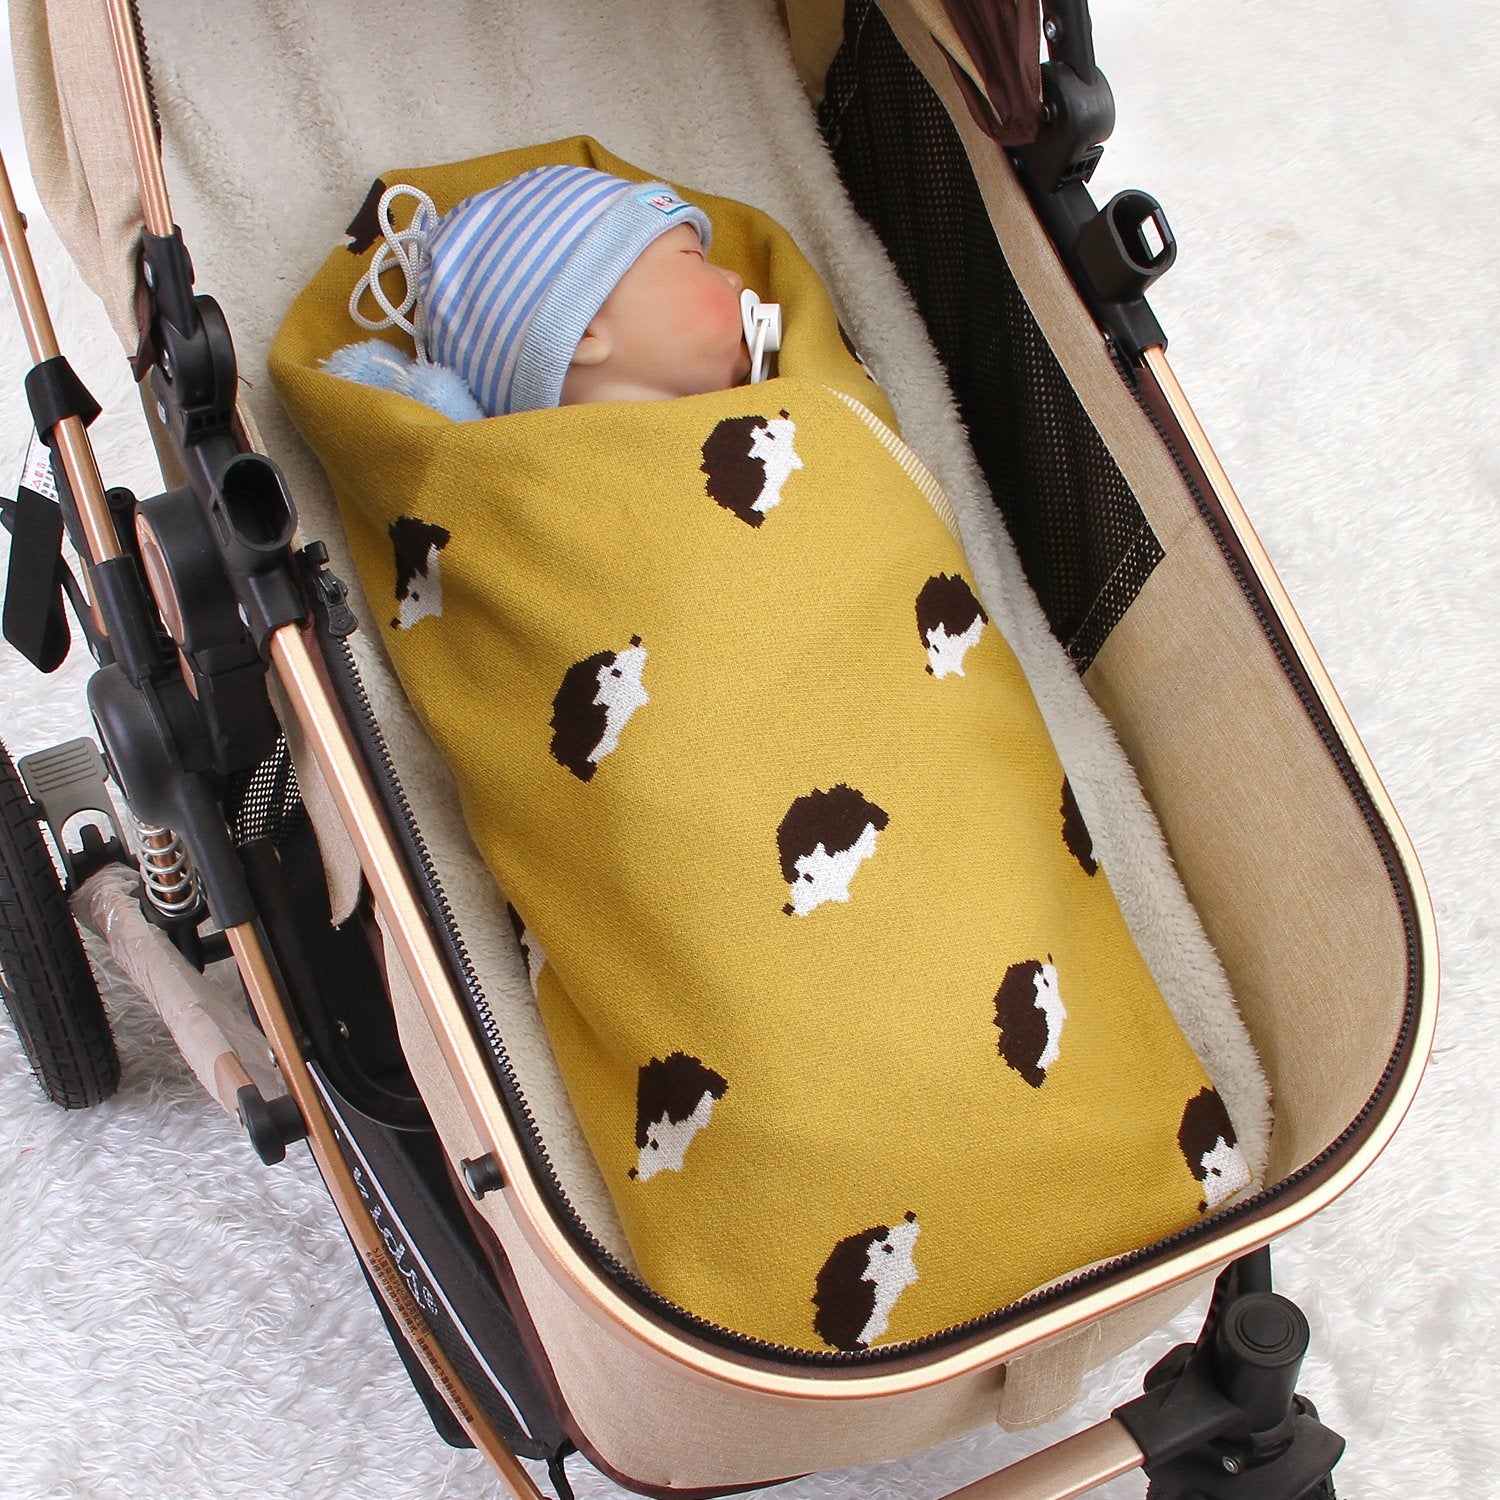 Baby Spring And Autumn Cover Blanket Cartoon Little Hedgehog Knitted Blanket Baby Holding Blanket Baby Clothes Wholesale